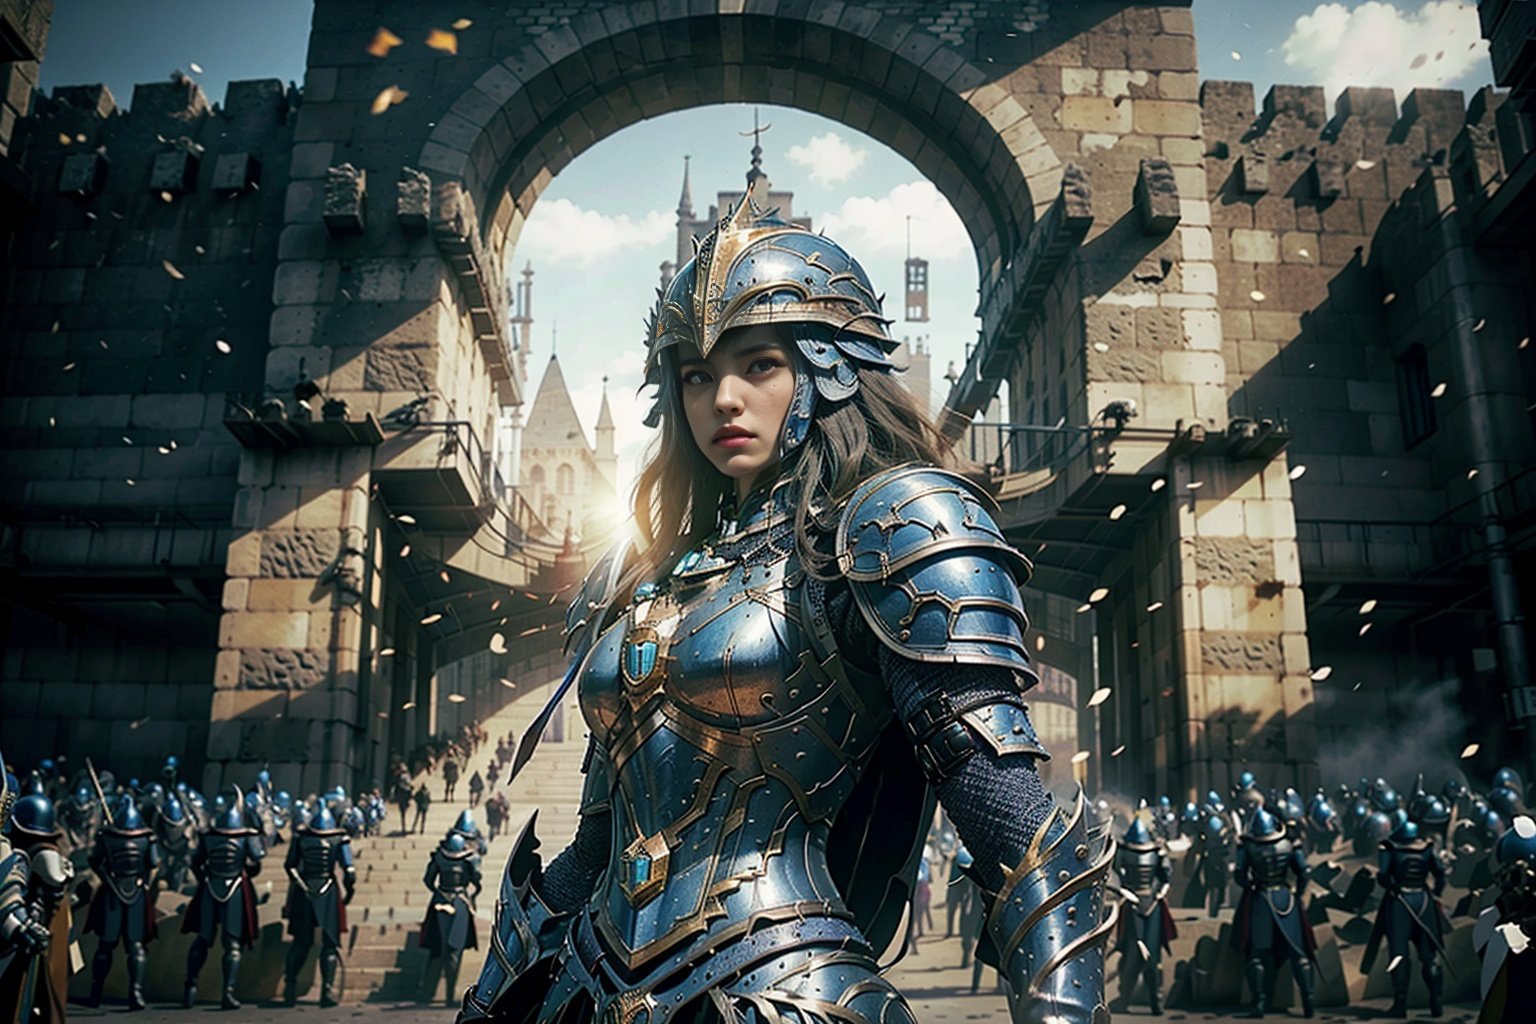 best quality,masterpiece,colorful,dynamic angle,highest detailed,<lora:ArmoredWarrior-000015:0.8>,Armor,1 girl,(blue eye:1.3),(blue armor:1.3),the black iron gate of the city wall,watching the audience,war-ridden,backlighting,